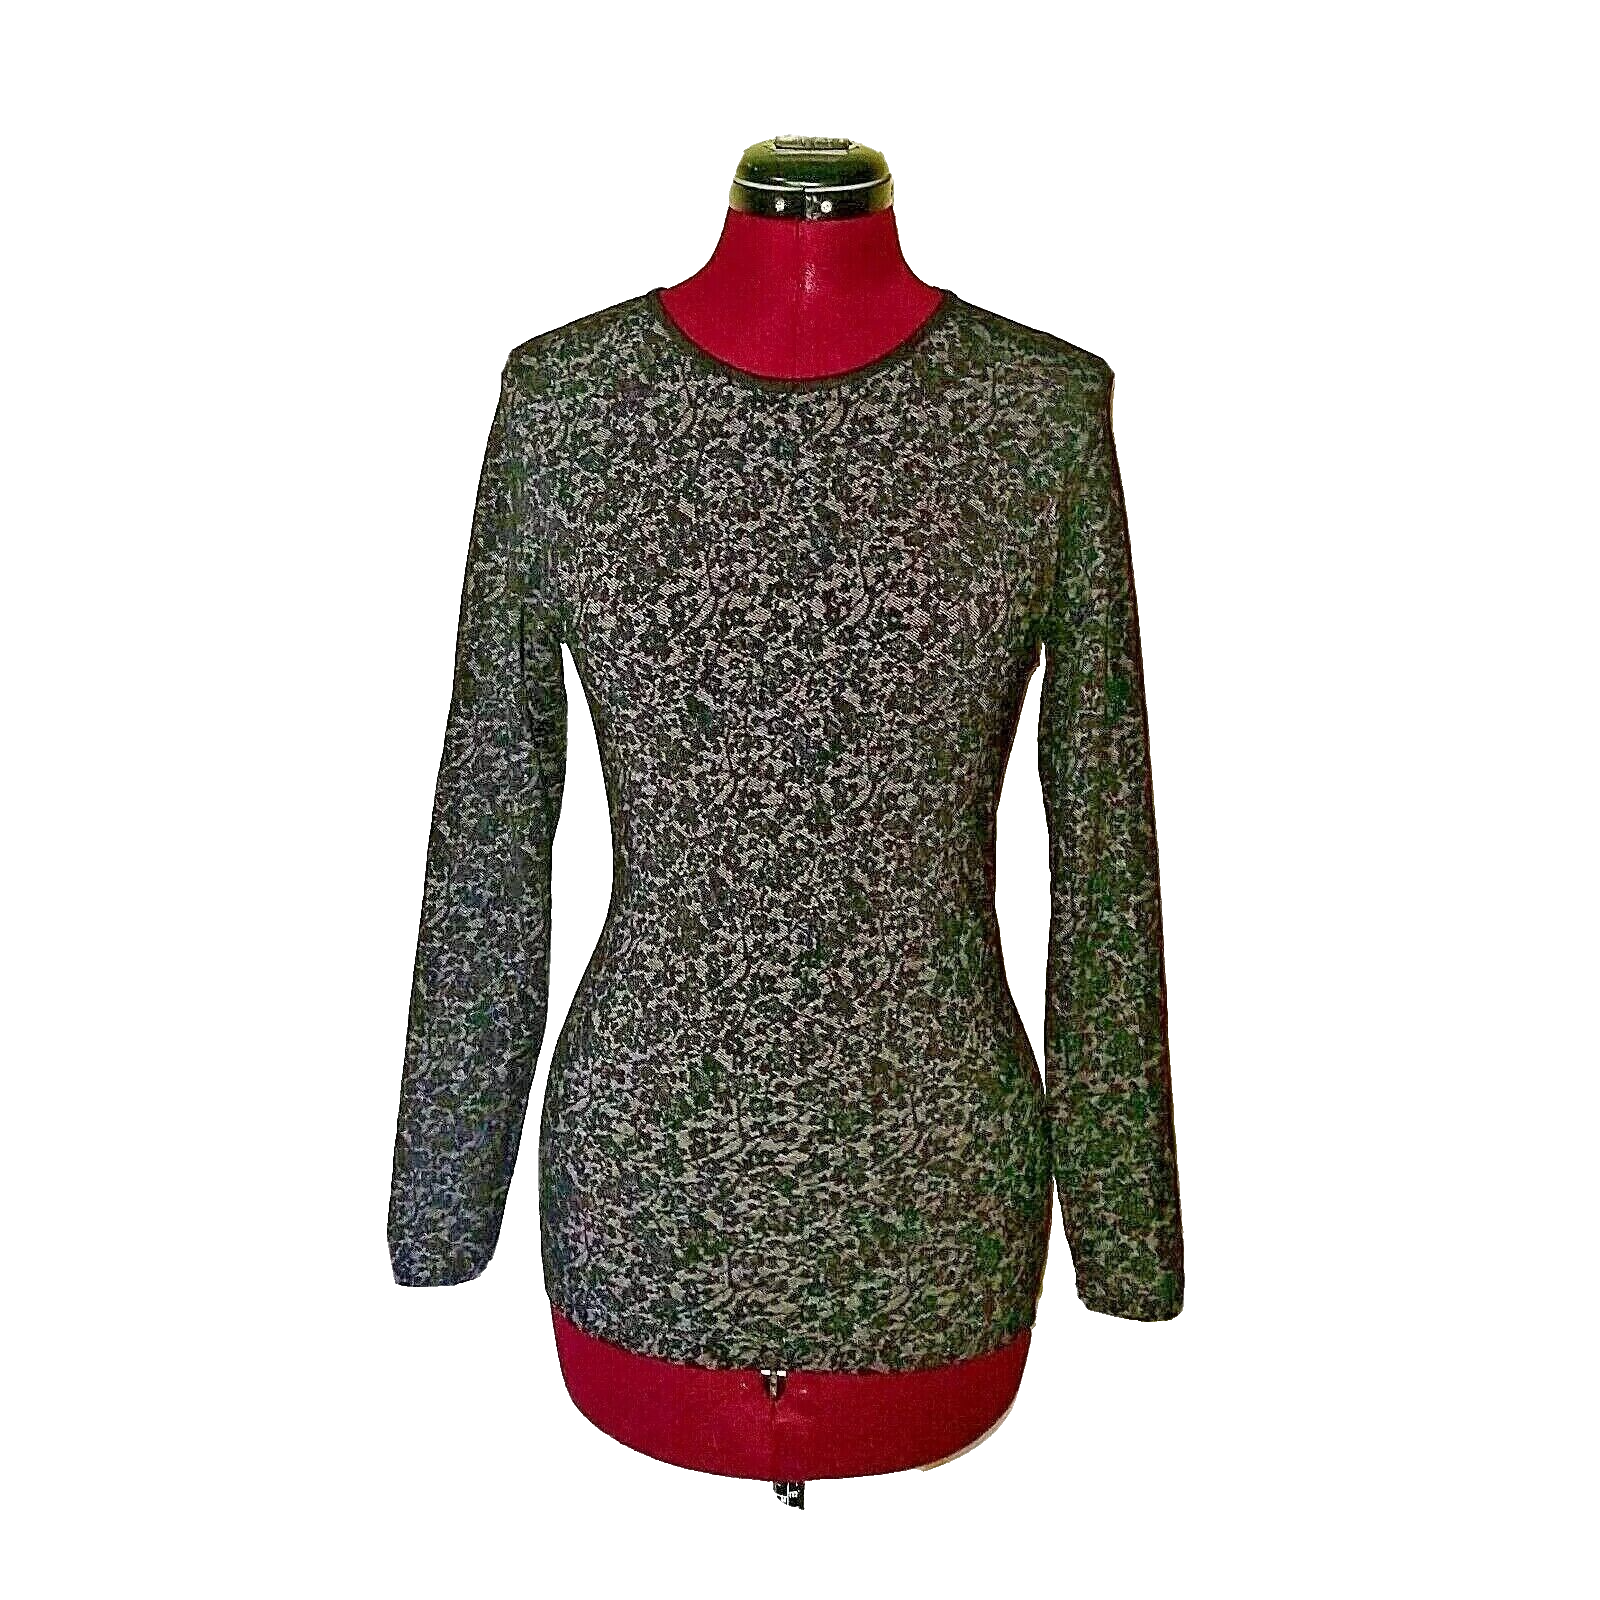 Primary image for Athleta Top Multicolor Women Size XS Long Sleeve Lace Pattern